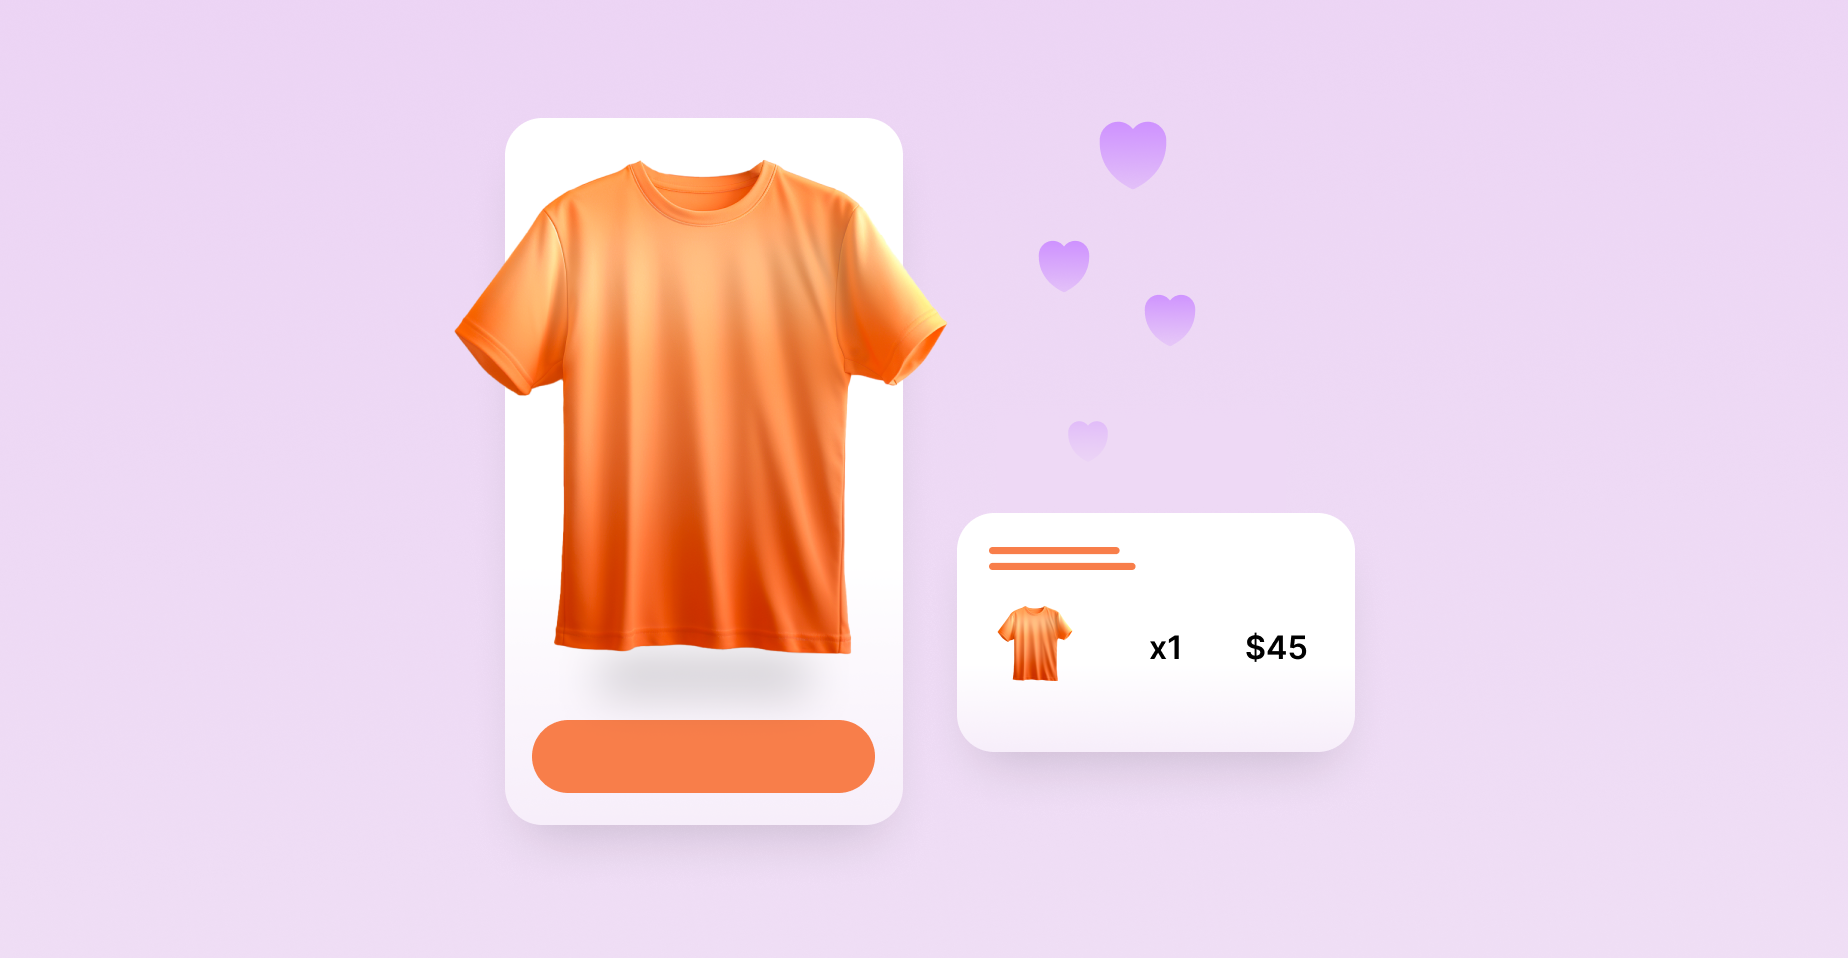 An image of a t-shirt on a seller website, with a pullout screen suggesting an edit to the product details and/or inventory.